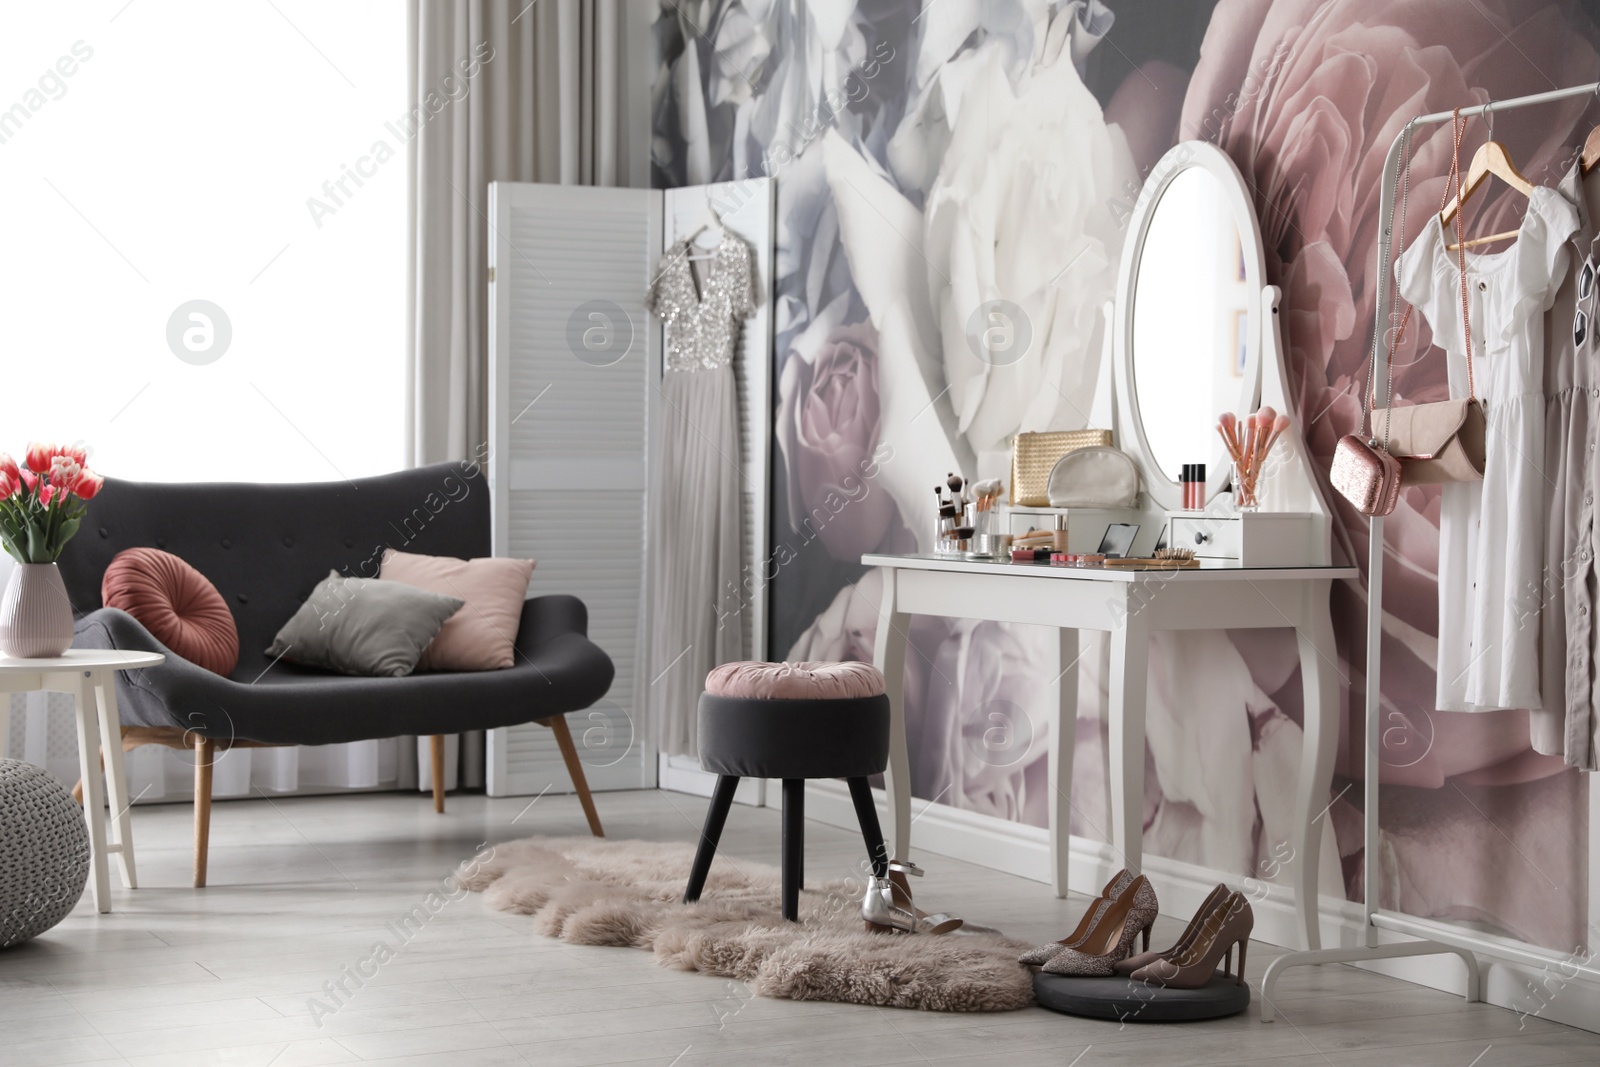 Photo of Stylish room interior with elegant dressing table, sofa and floral wallpaper